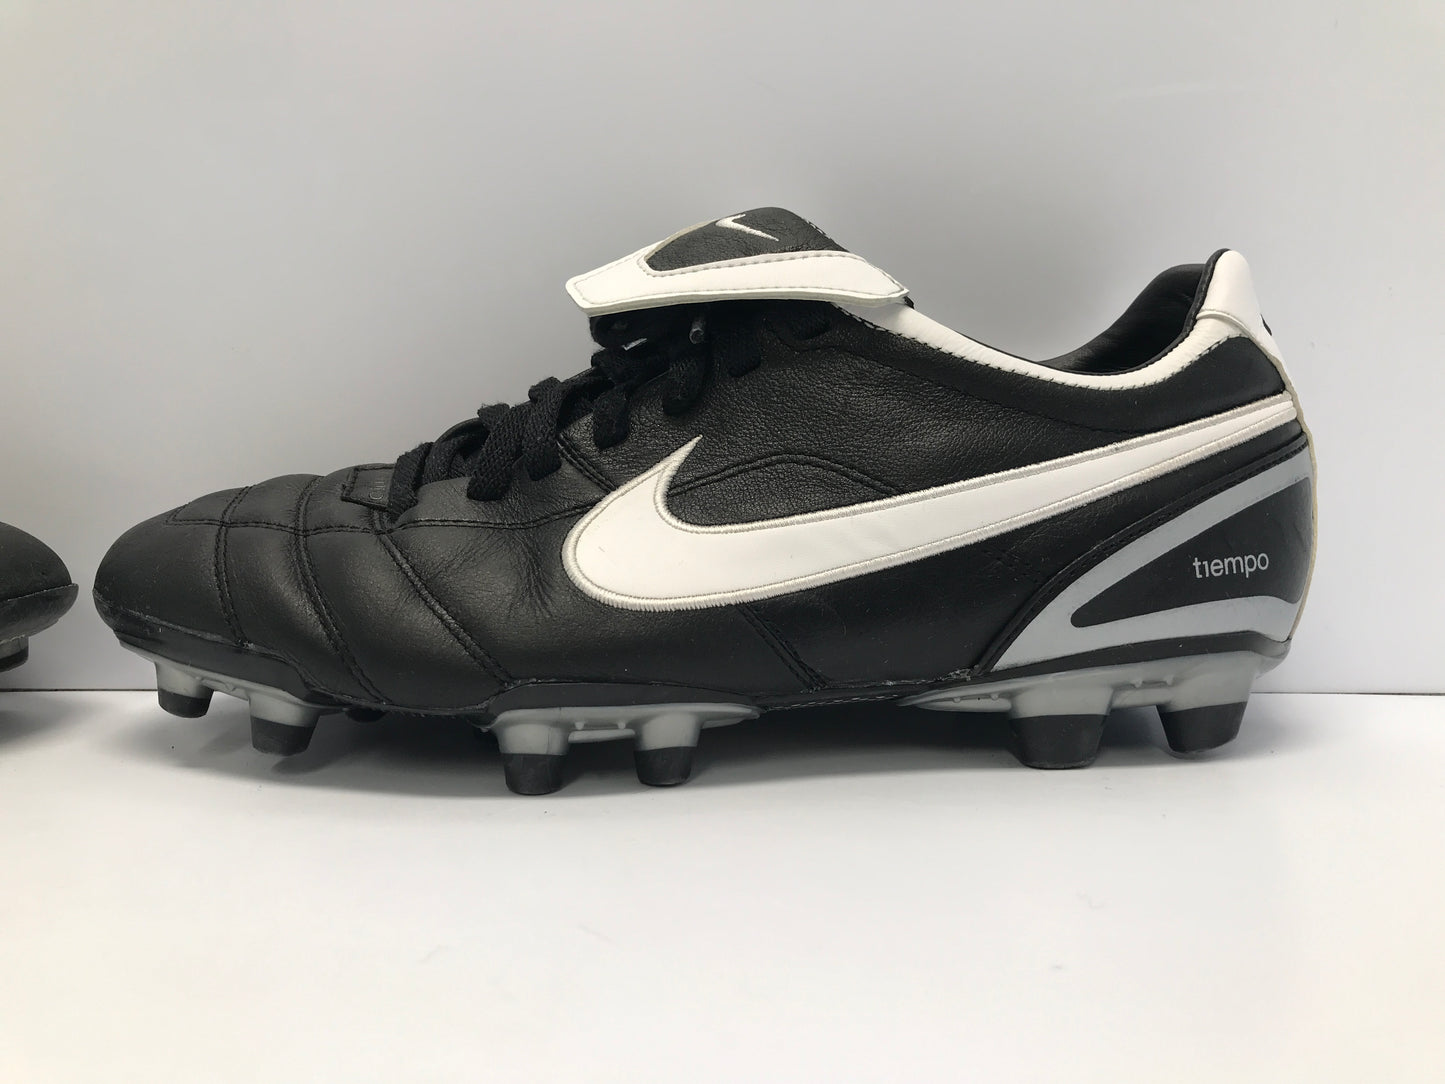 Soccer Shoes Cleats Men's Size 10 Nike Tiempo Black White Like New